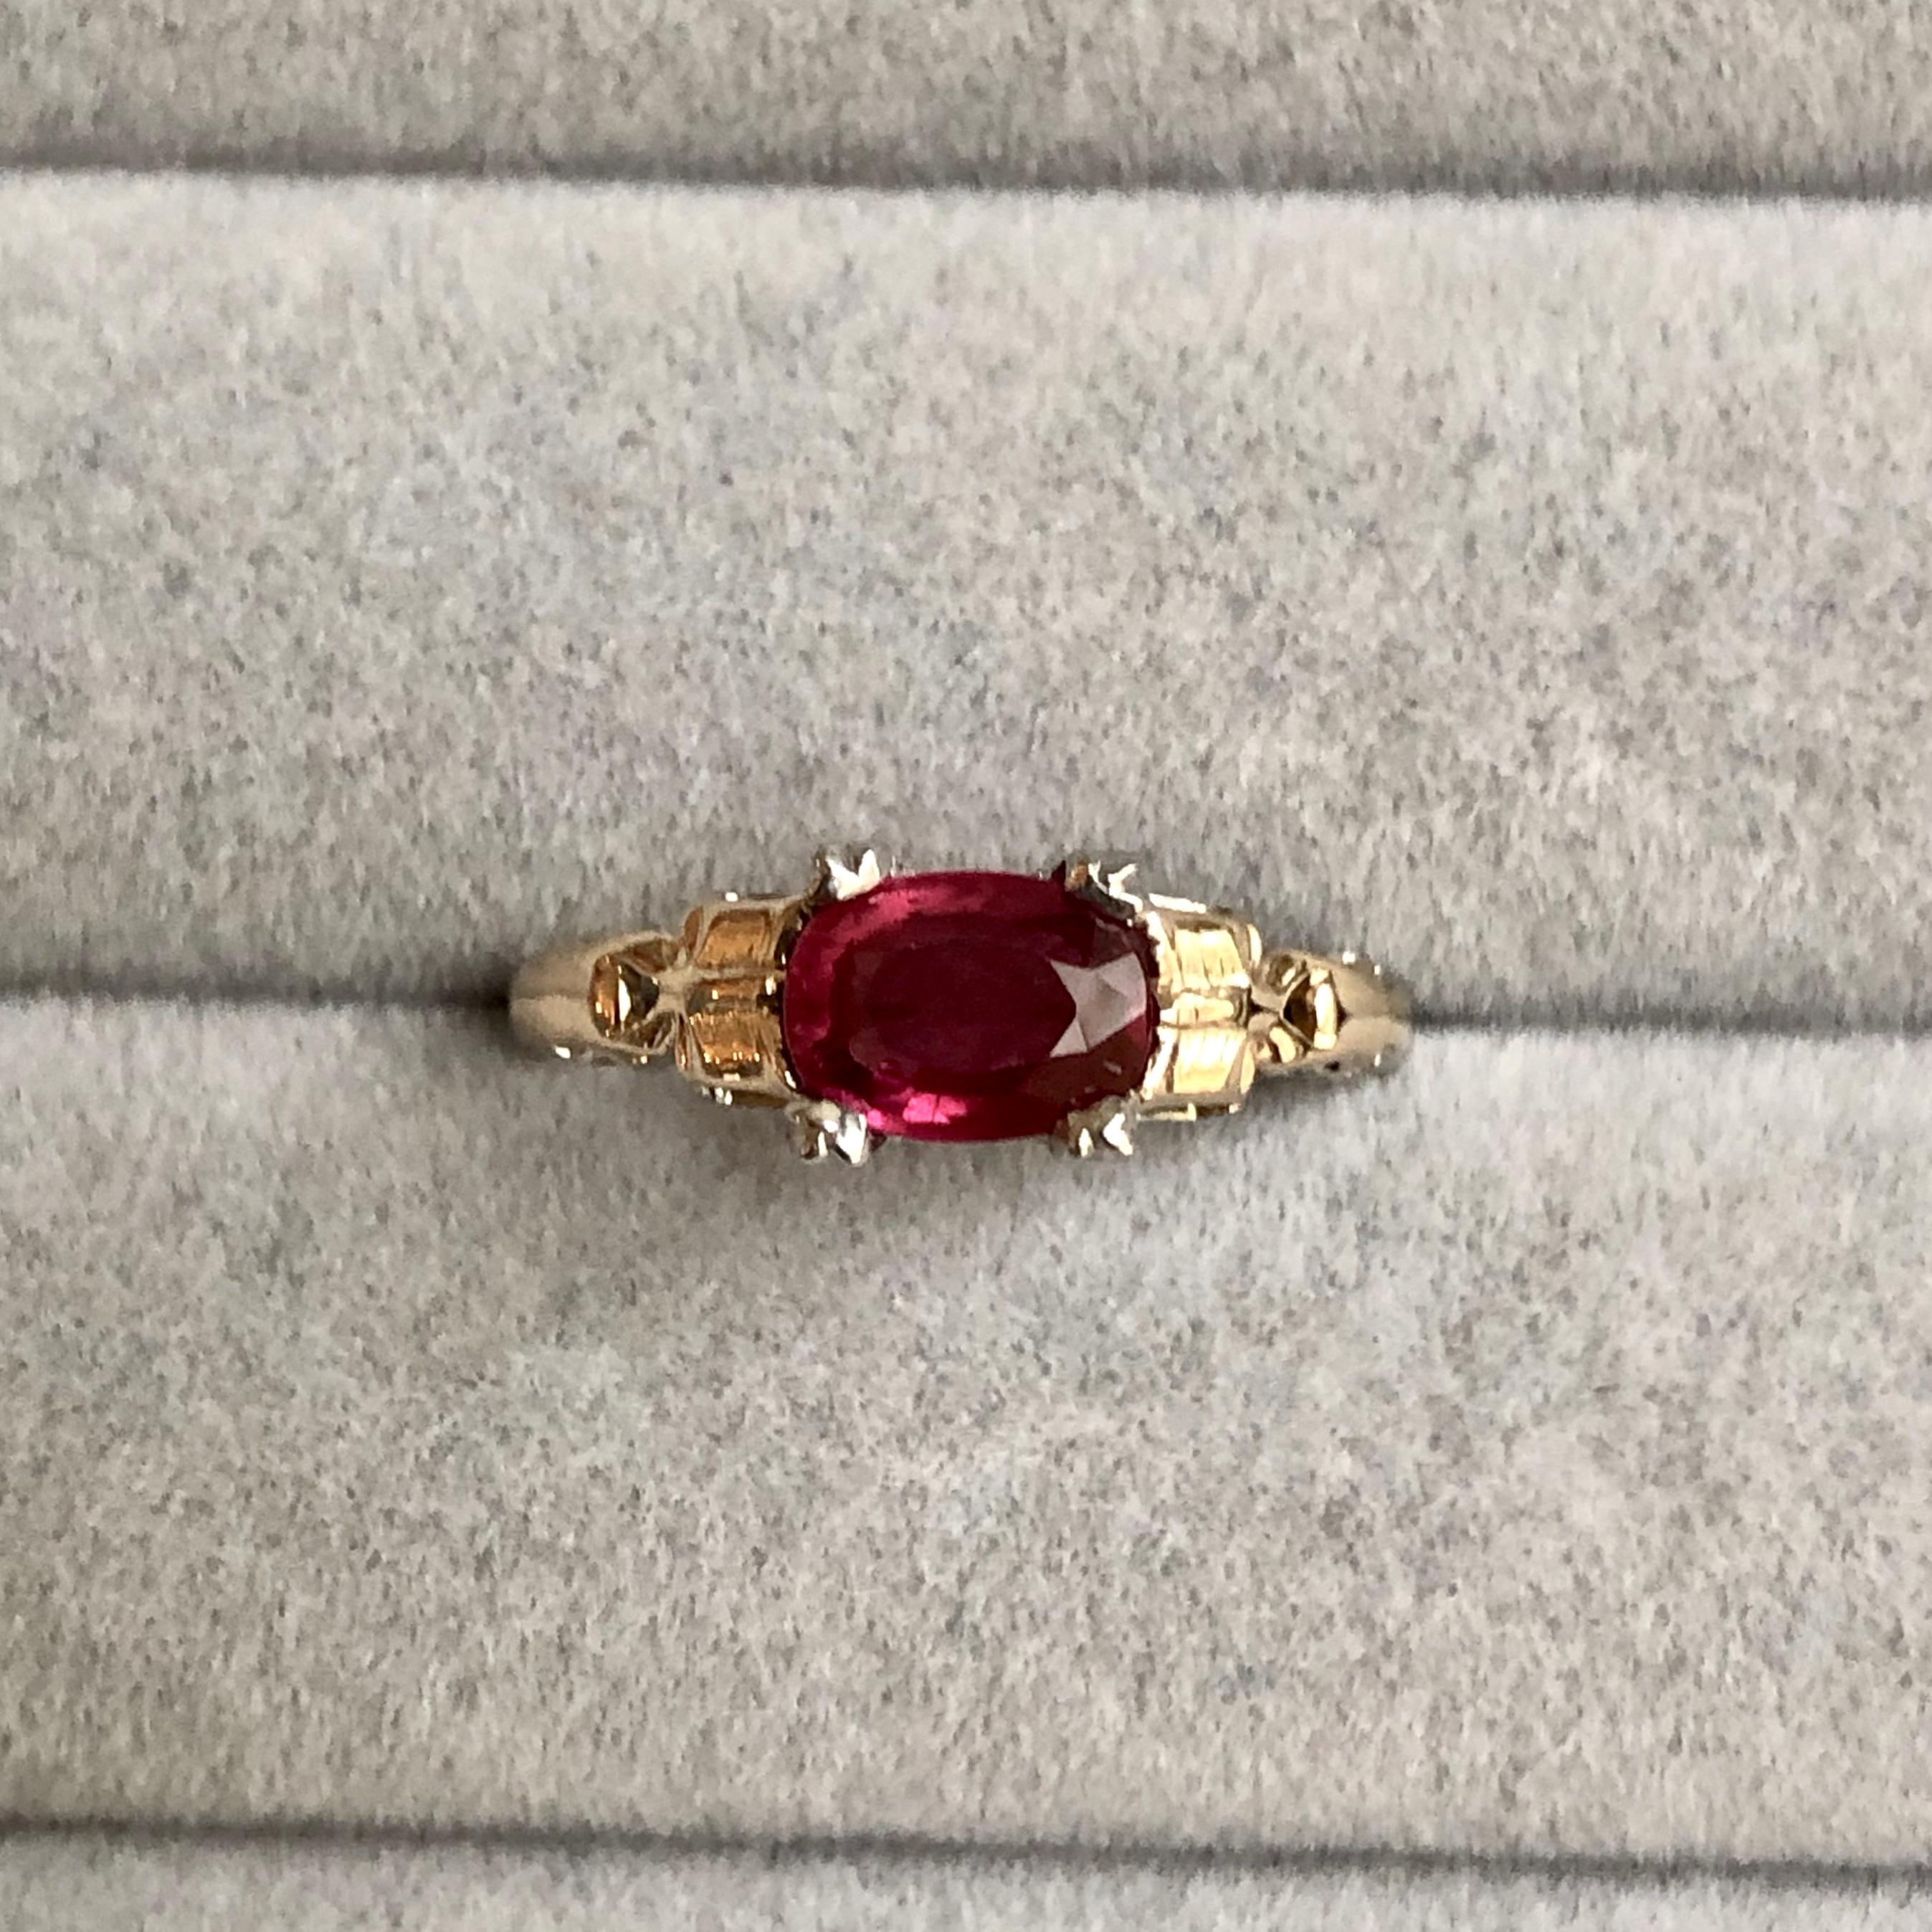 Original Art Deco Ruby Platinum 18k Yellow Gold Ring. This is a beautiful original art deco ring c.1930. The ring is set with 1 oval cut ruby in platinum with 18k yellow gold. The gorgeous ruby is estimate to be 1.05 carats. The ruby is a natural